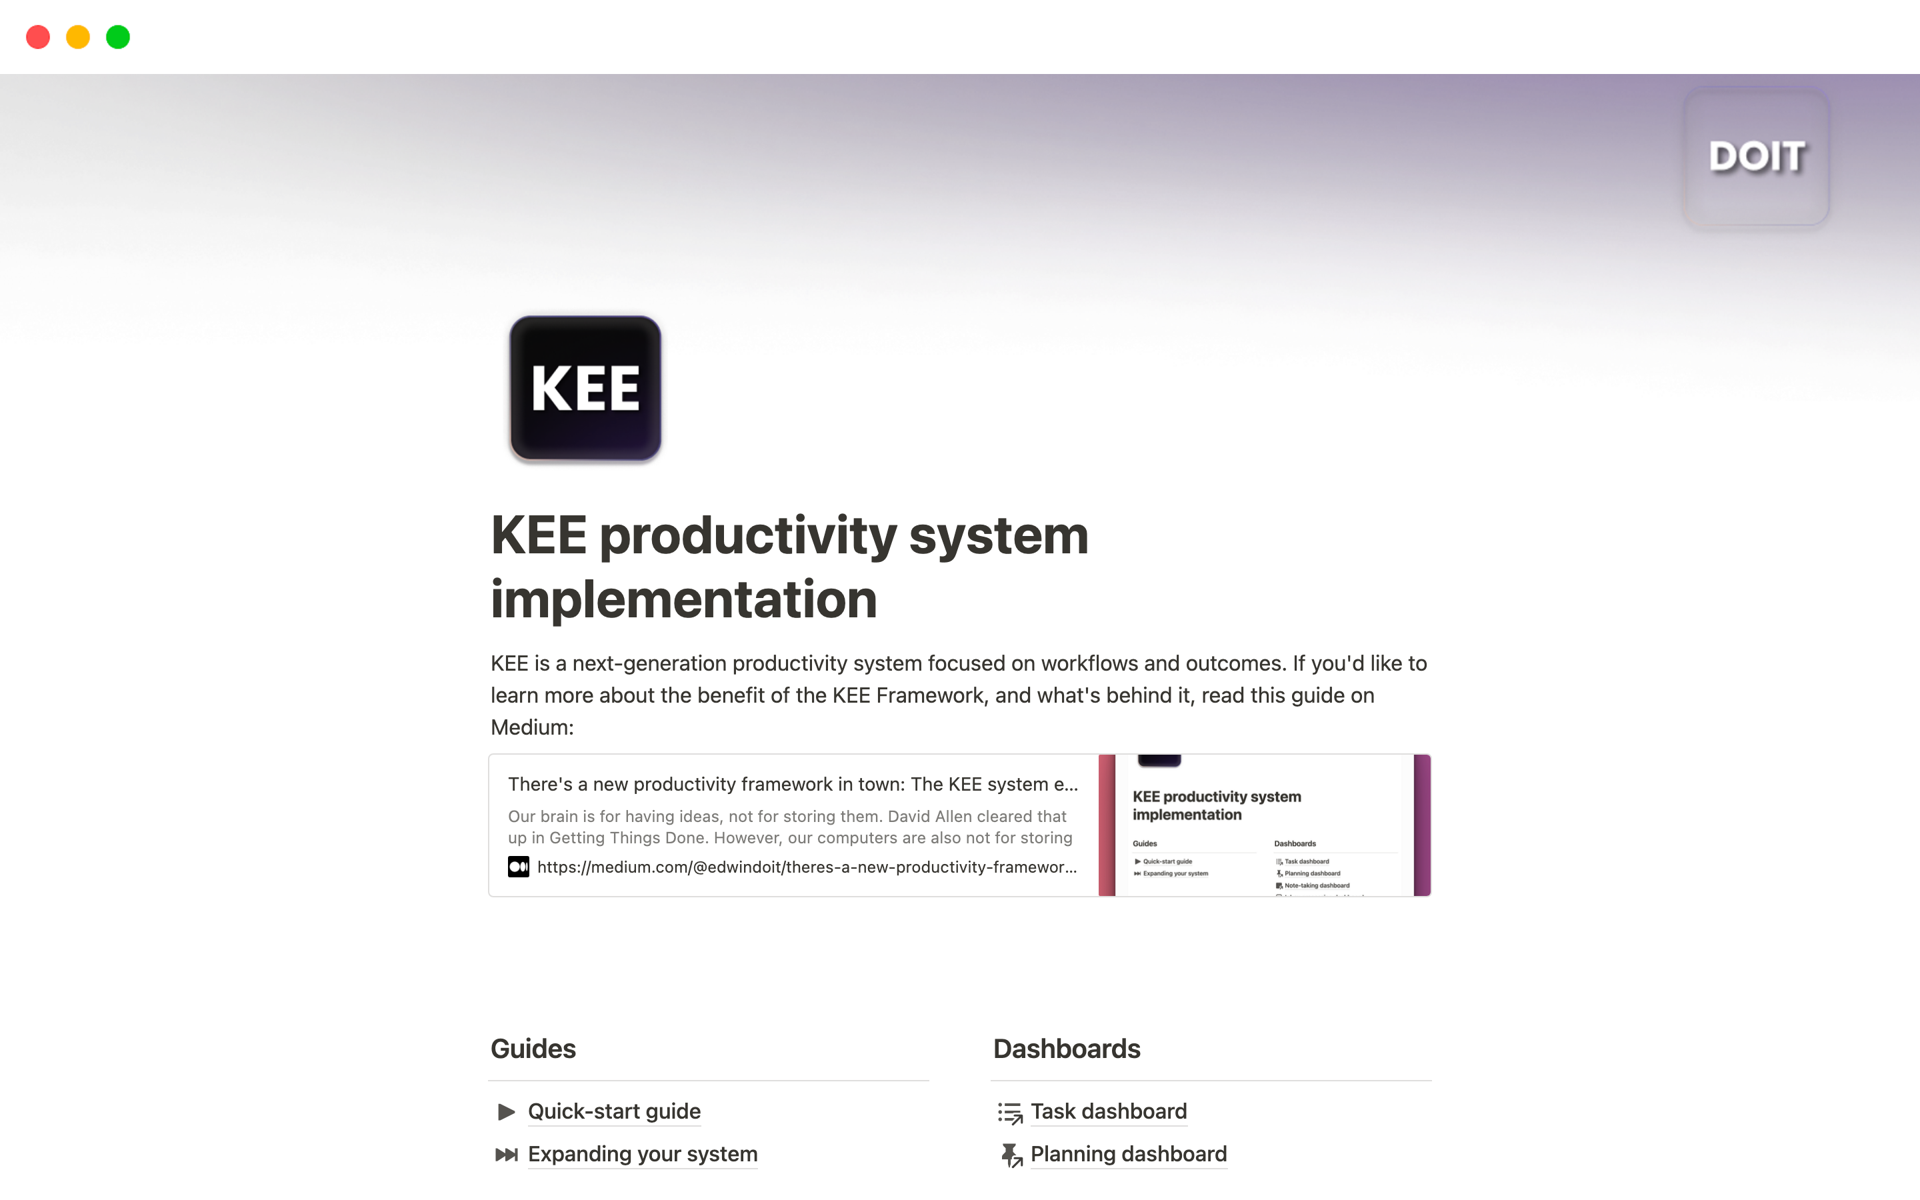 KEE is a next-generation productivity system focused on workflows and their outcomes - with 7 preconfigured processes included. 